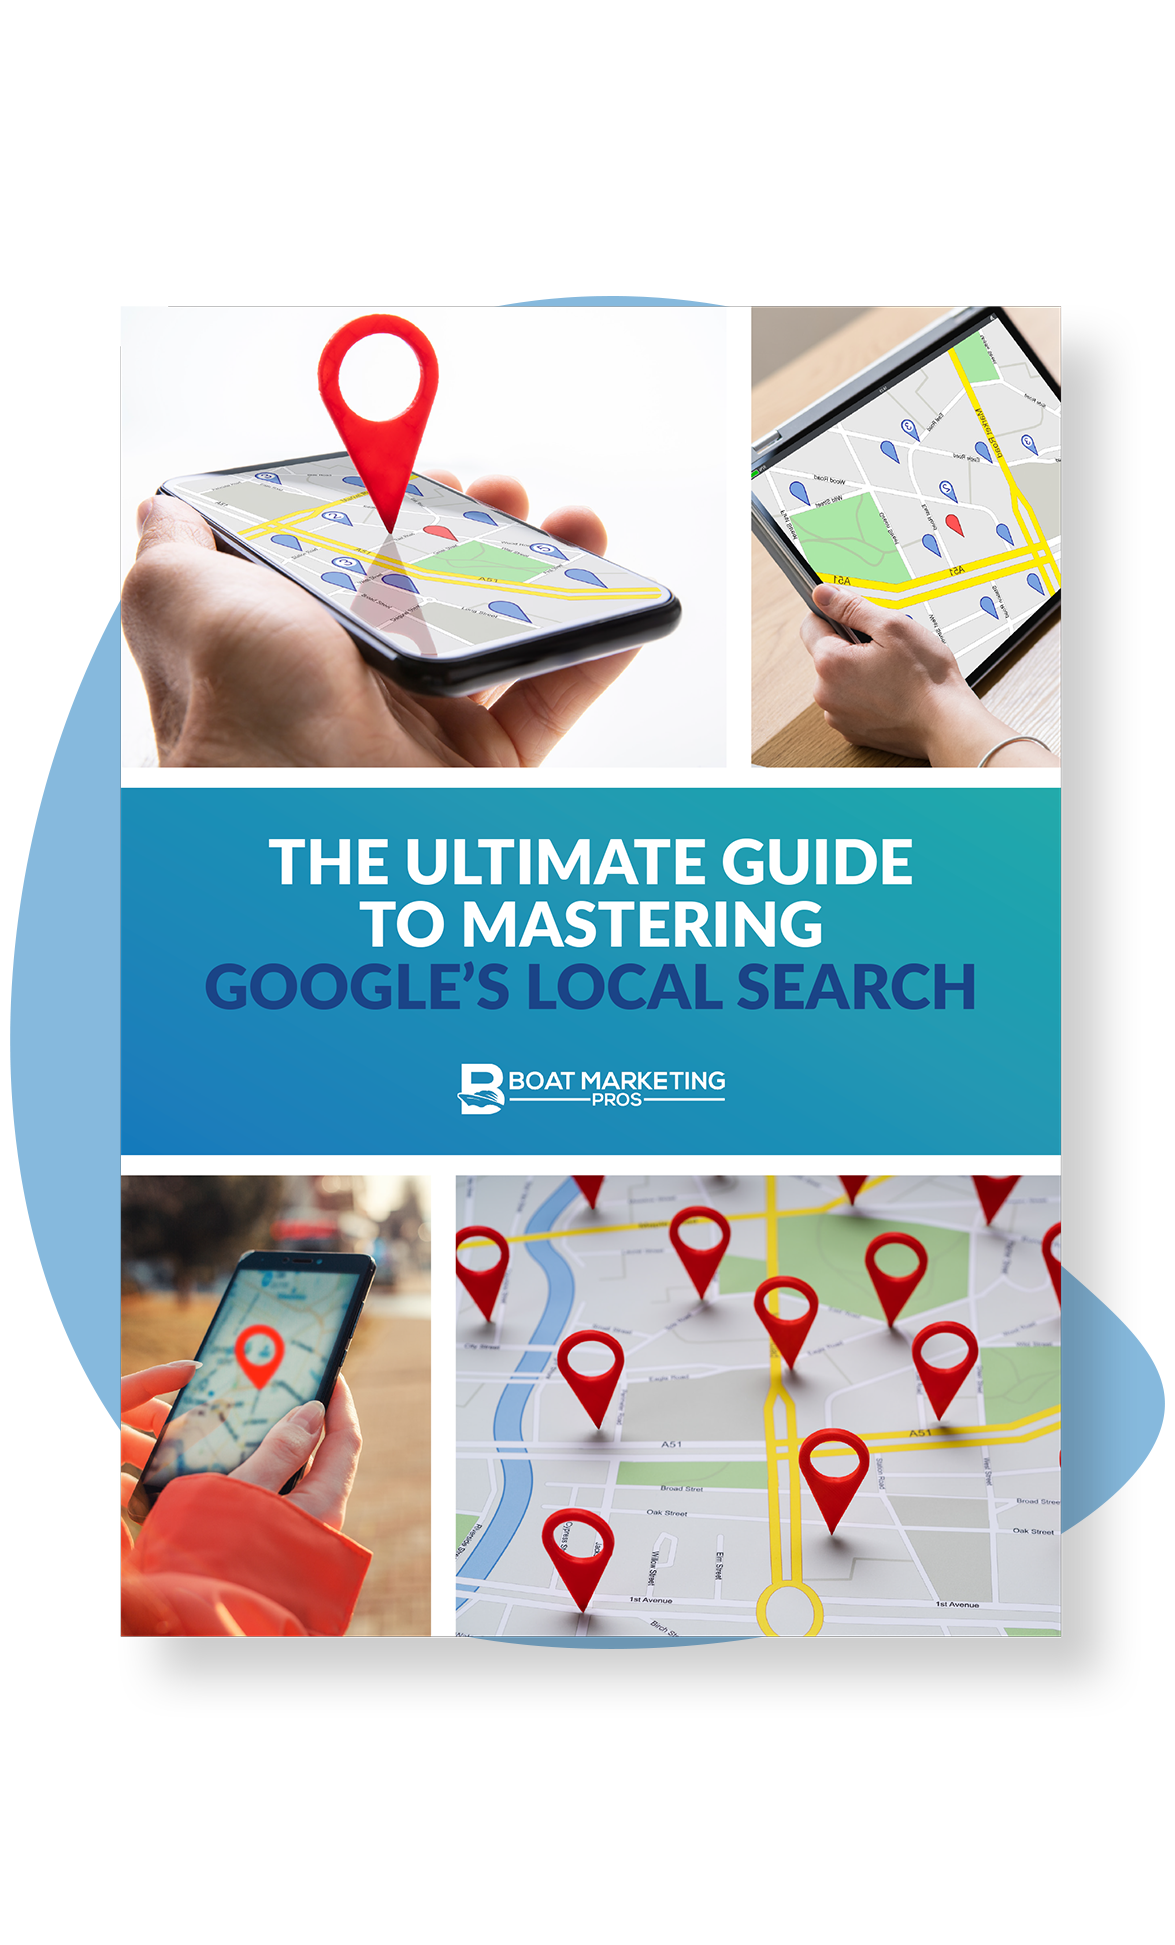 The Ultimate Guide to Mastering Google’s Local Search